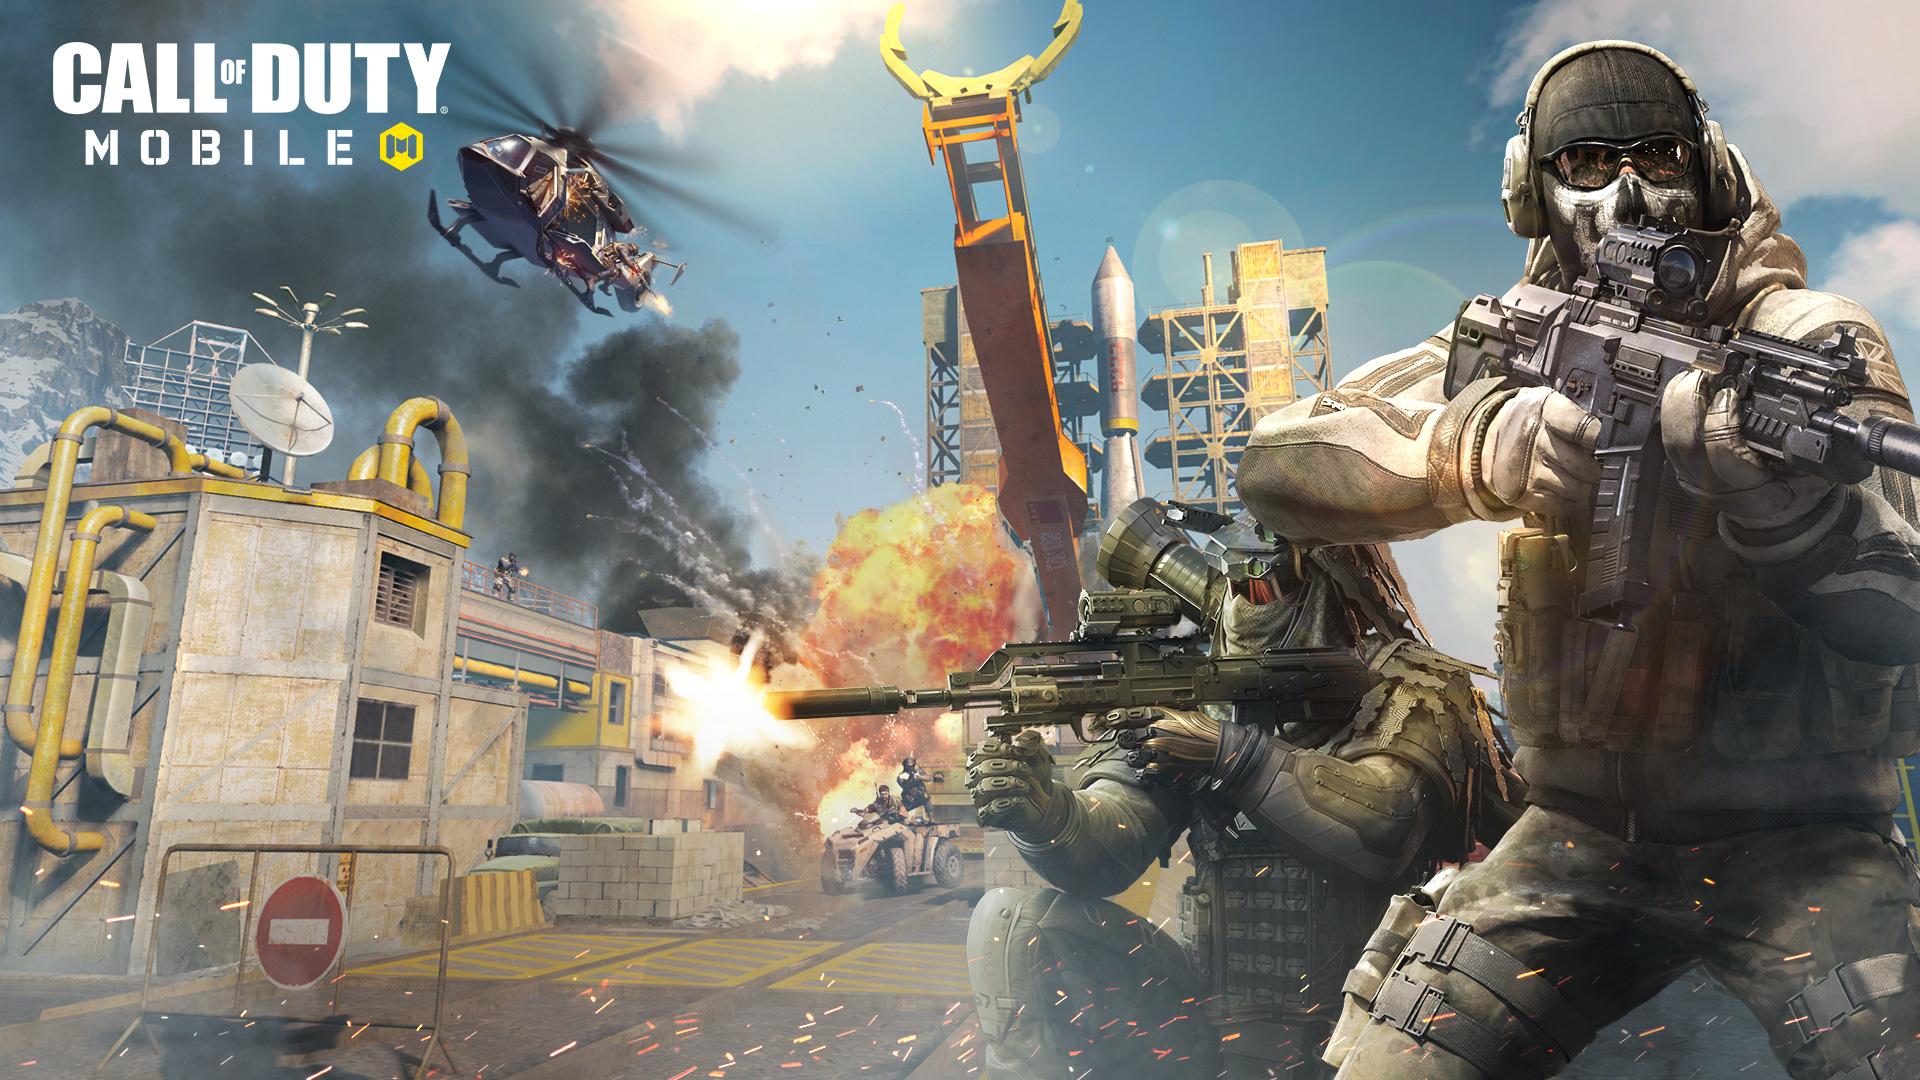 Call of Duty: Mobile now available to play on both Android